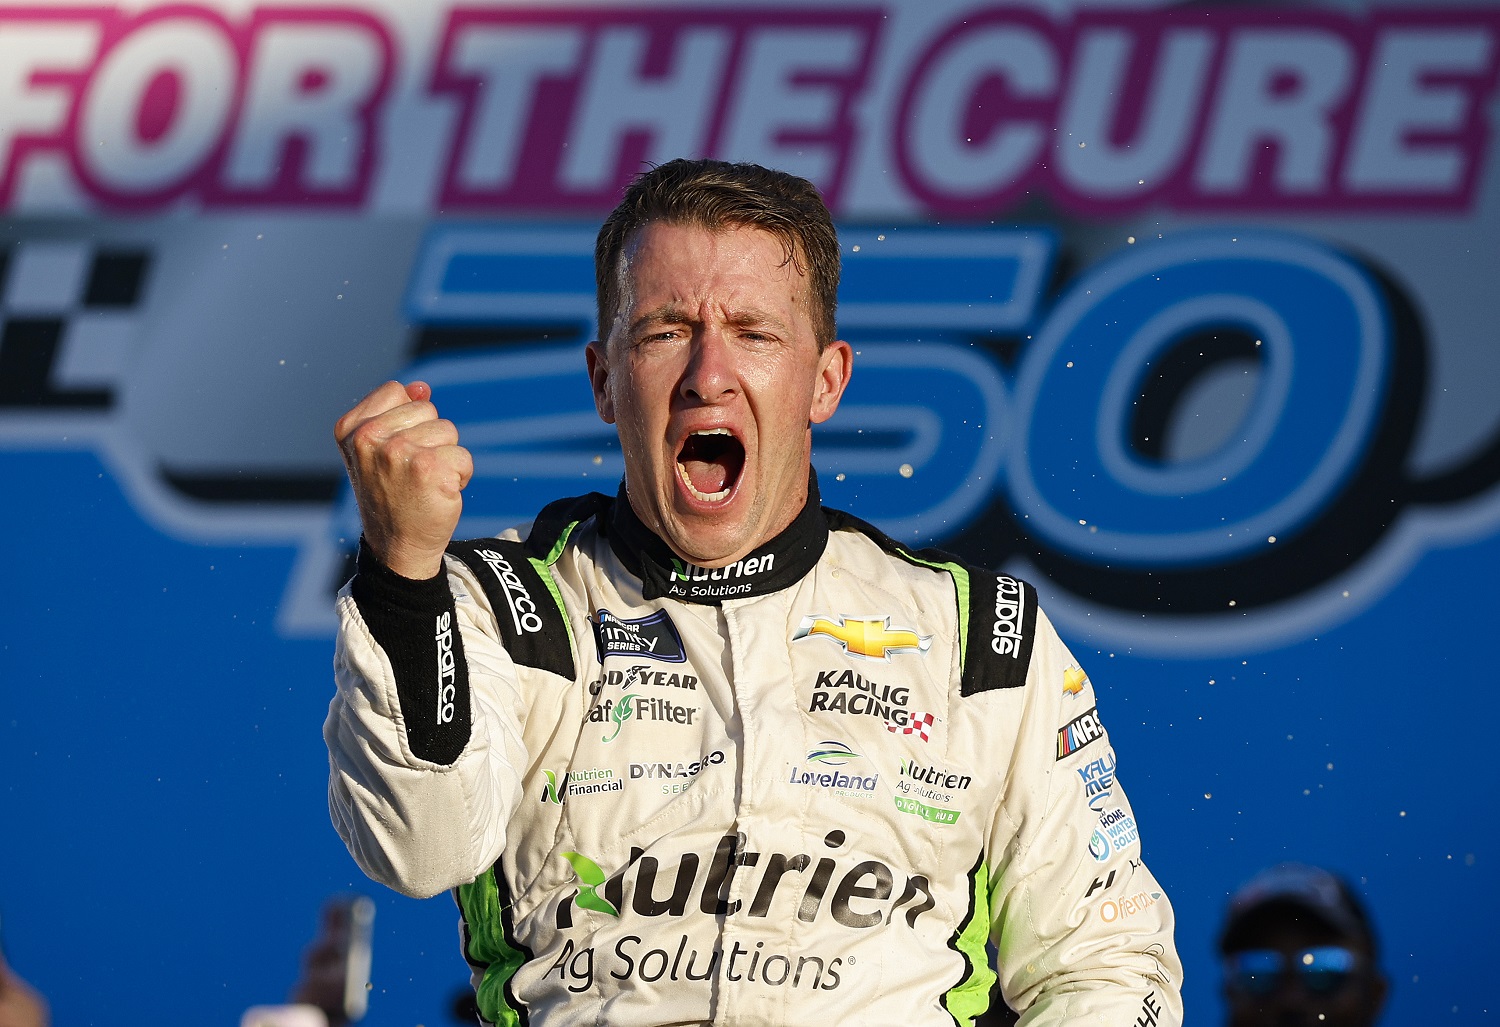 AJ Allmendinger celebrates in Victory Lane after winning the NASCAR Xfinity Series Drive for the Cure 250 at Charlotte Motor Speedway on Oct. 8, 2022, in Concord, North Carolina. | Jared C. Tilton/Getty Images